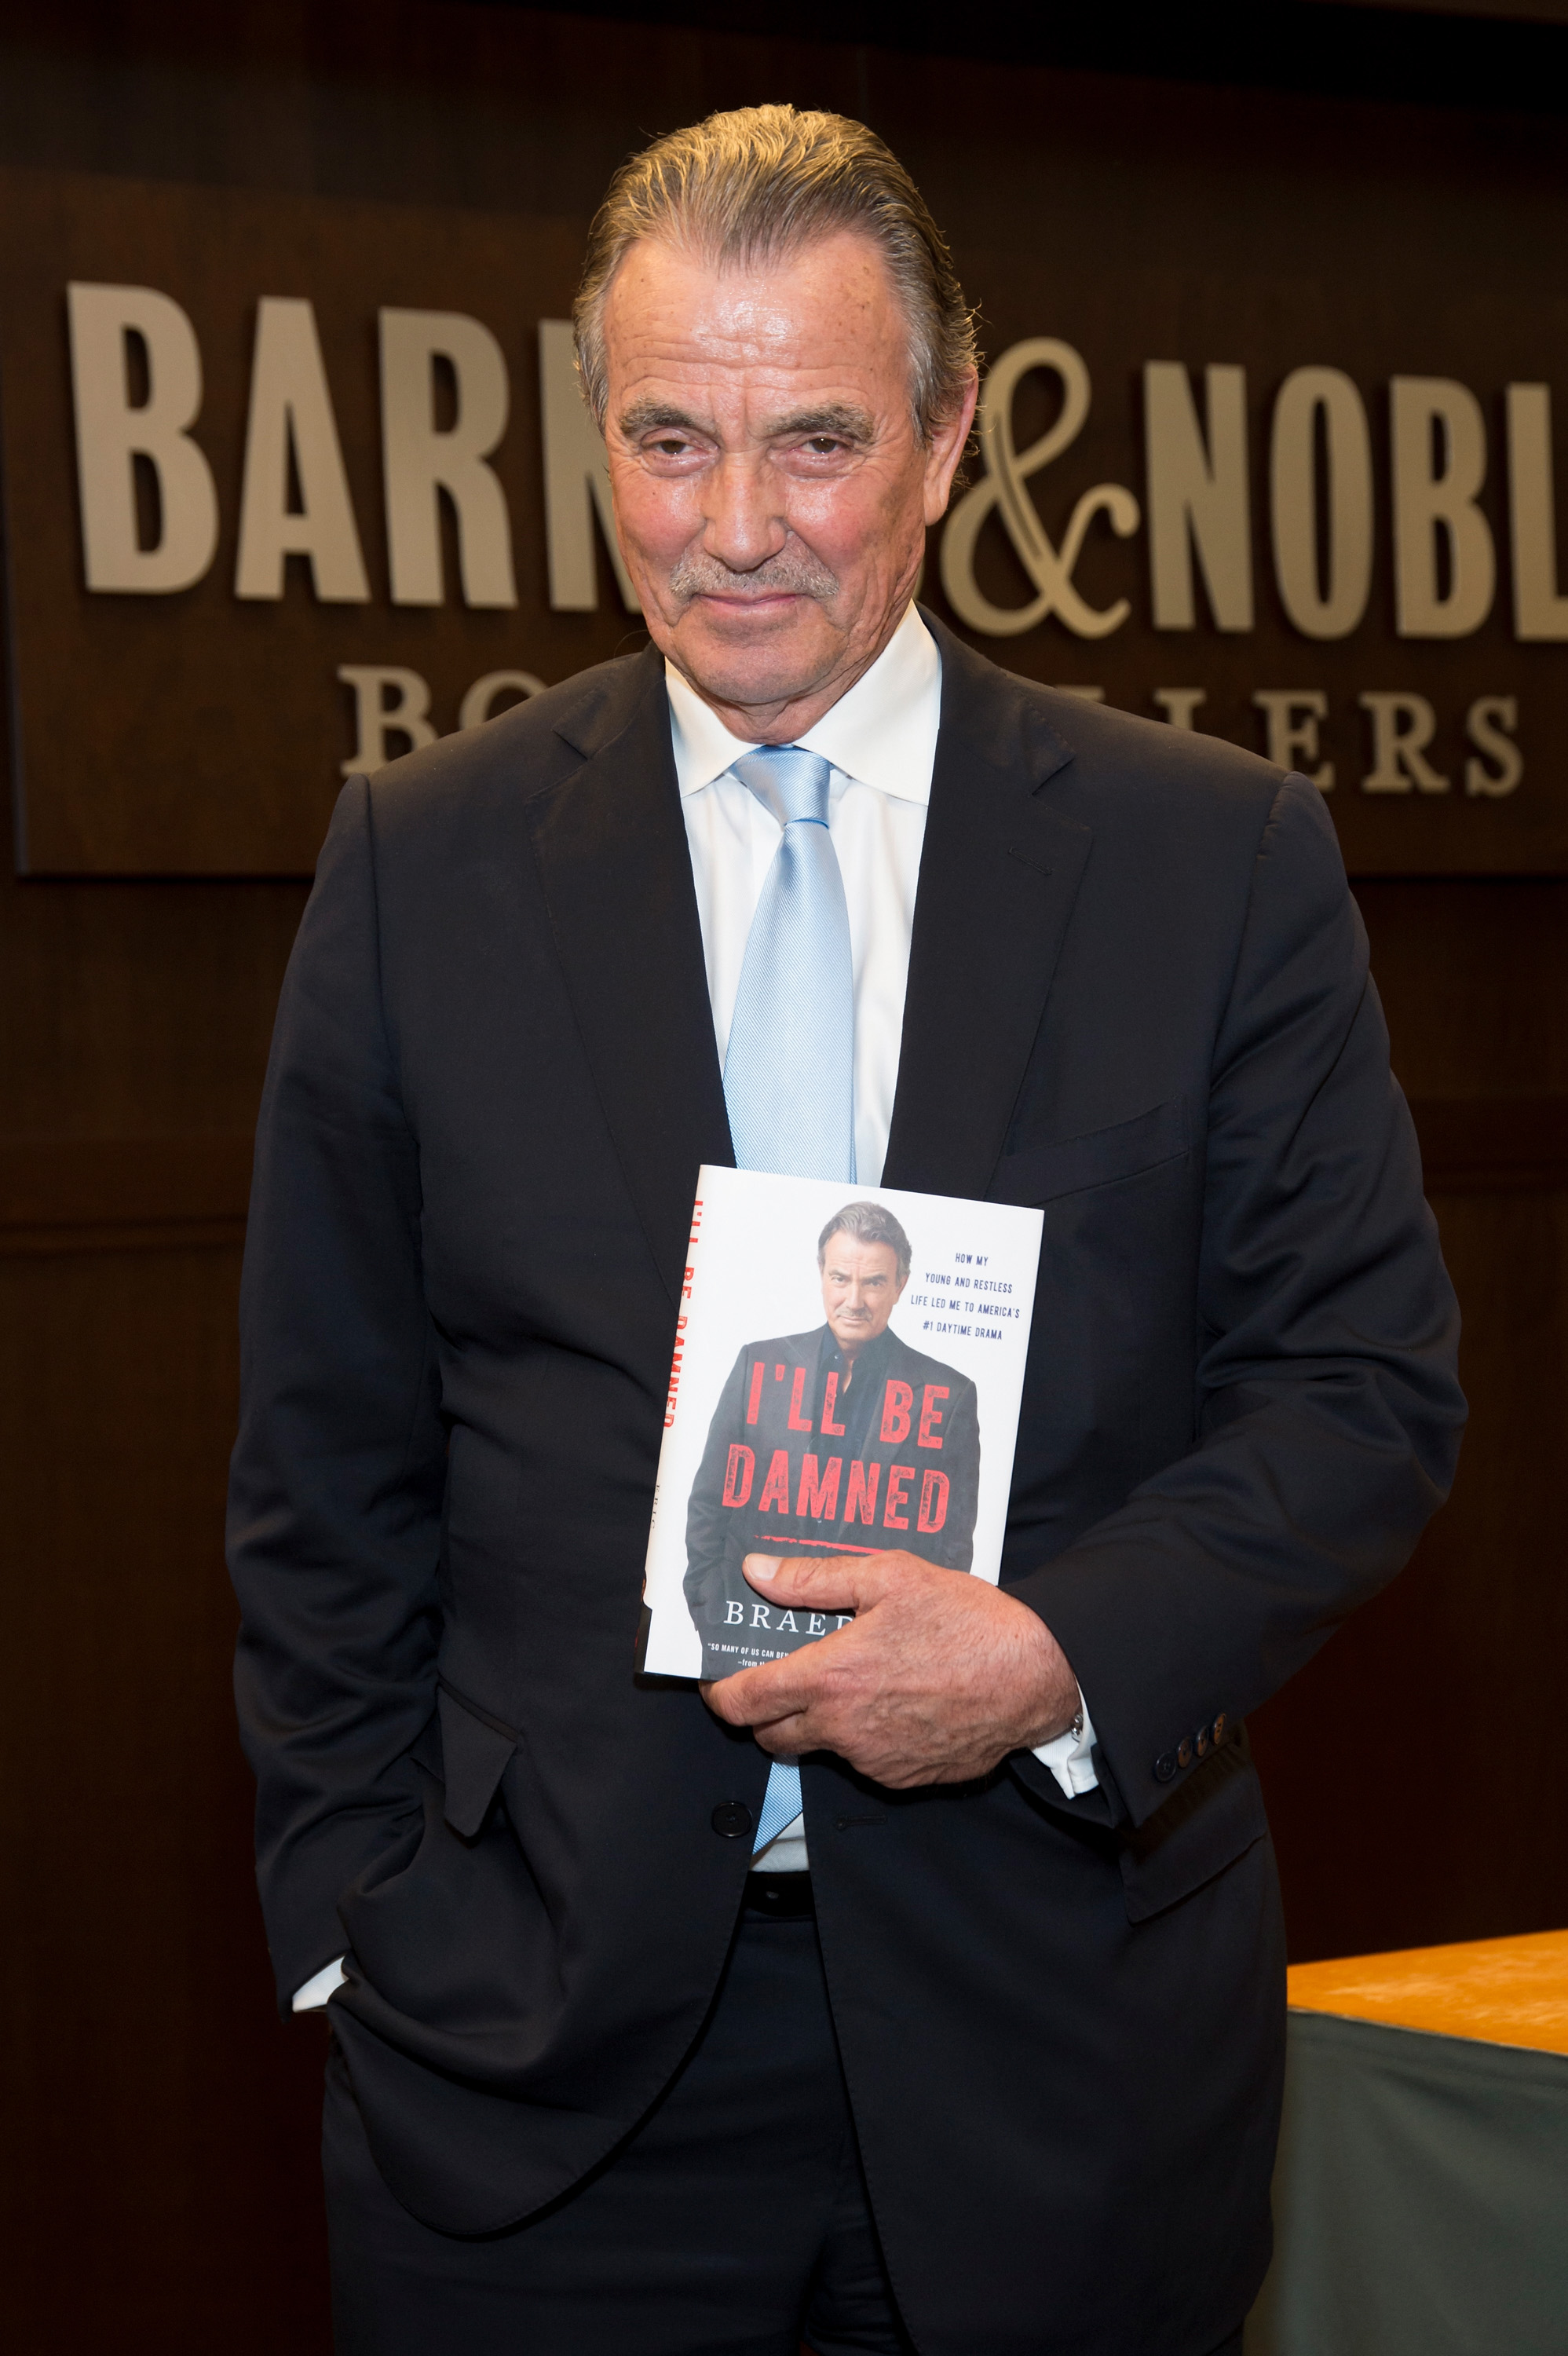 Eric Braeden at a book signing